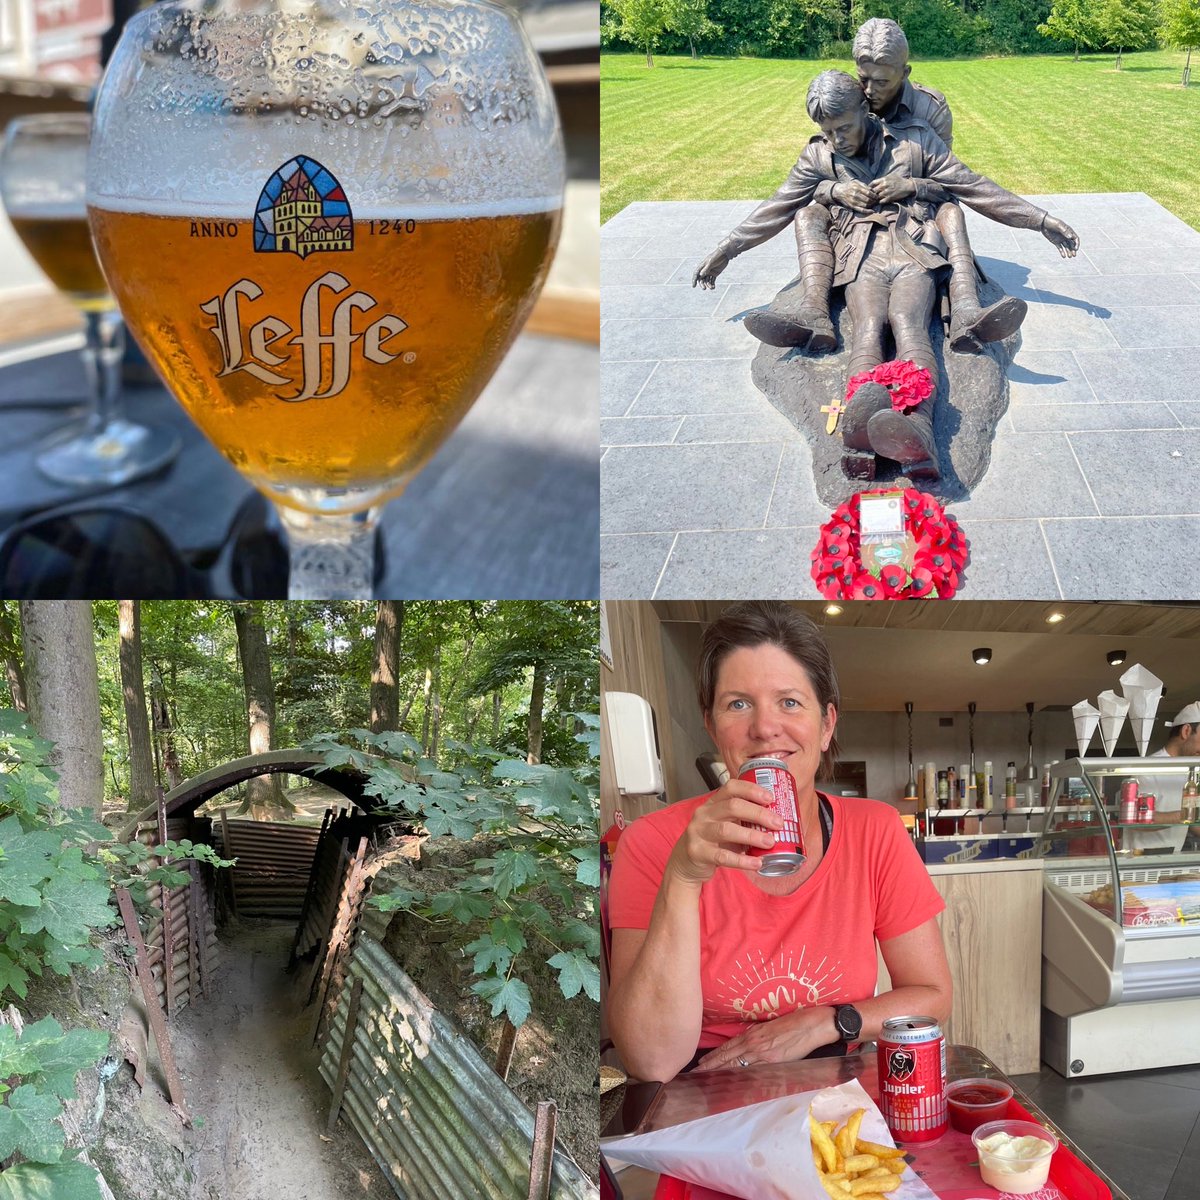 Left Normandy & headed to Ypres in Belgium, still chasing the history of the brave souls who fought in WWI. So many fascinating yet sad tales, the #BrothersInArms story  capturing the devastation of war the most for us 😔 . In the Netherlands now - home of frites & beer 🍟 🍺 🇳🇱